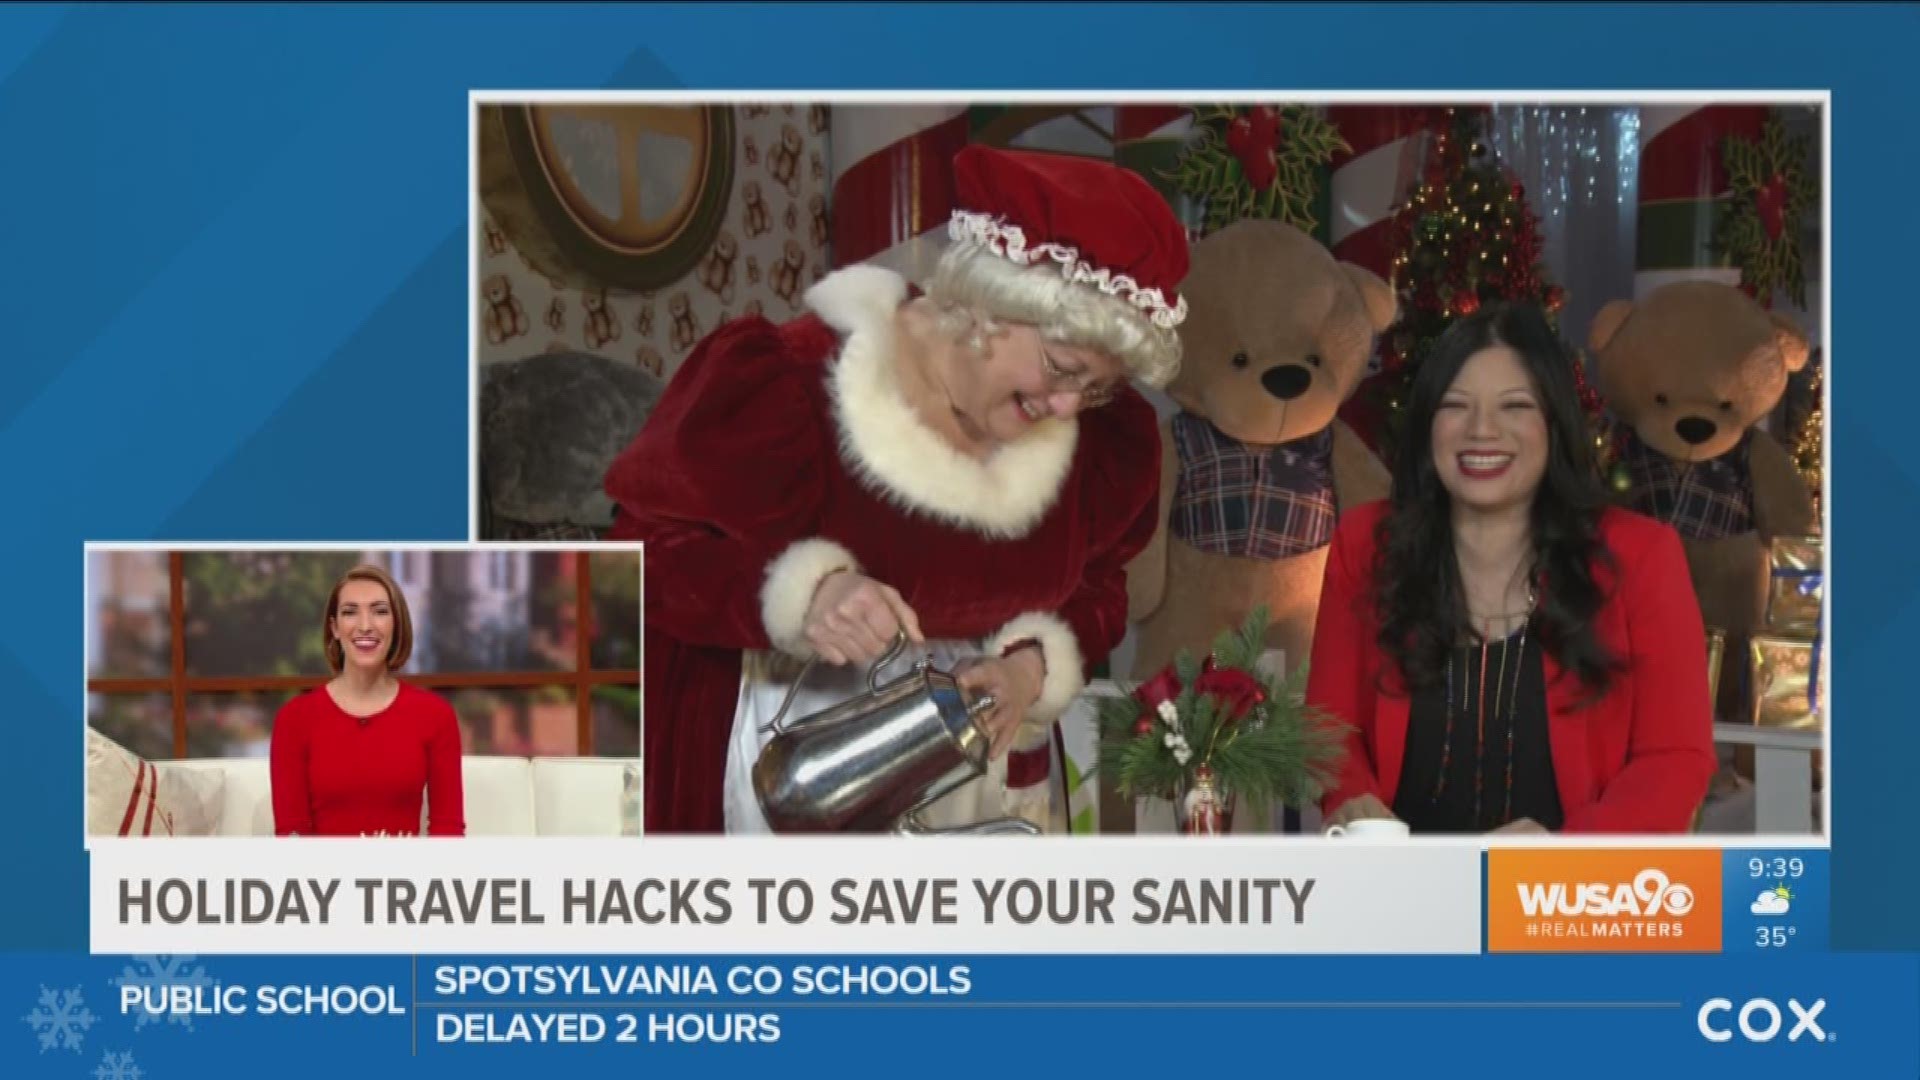 Winnie Sun, financial advisor, TV contributor and mom is here to help you remain calm while traveling during the holiday season. This segment was sponsored by Hilton